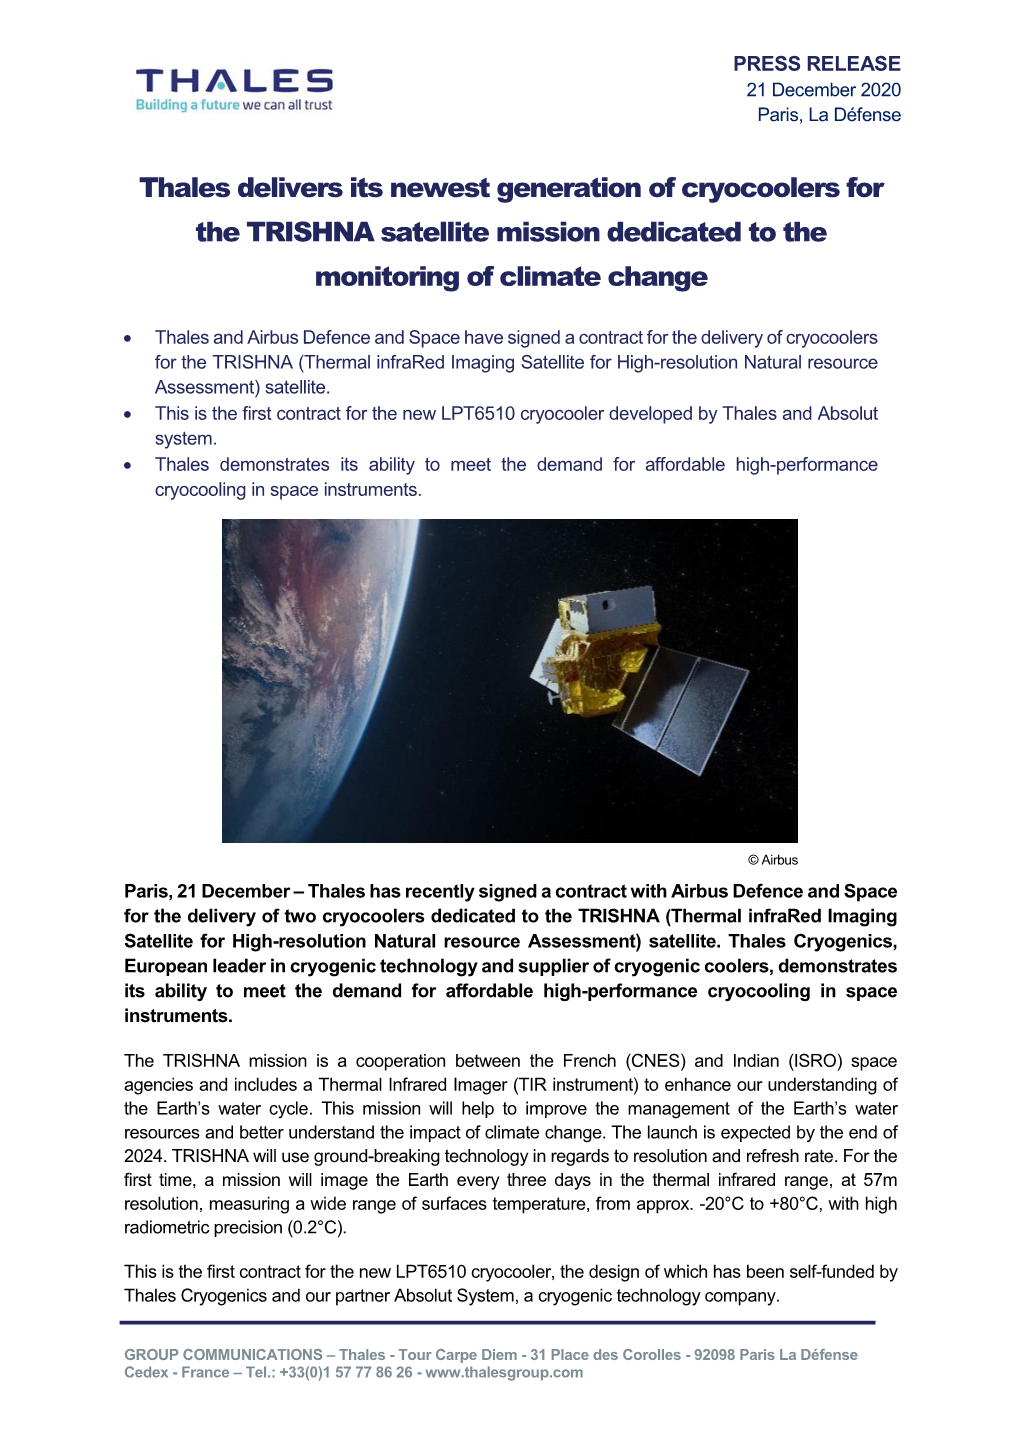 Thales Delivers Its Newest Generation of Cryocoolers for the TRISHNA Satellite Mission Dedicated to the Monitoring of Climate Change